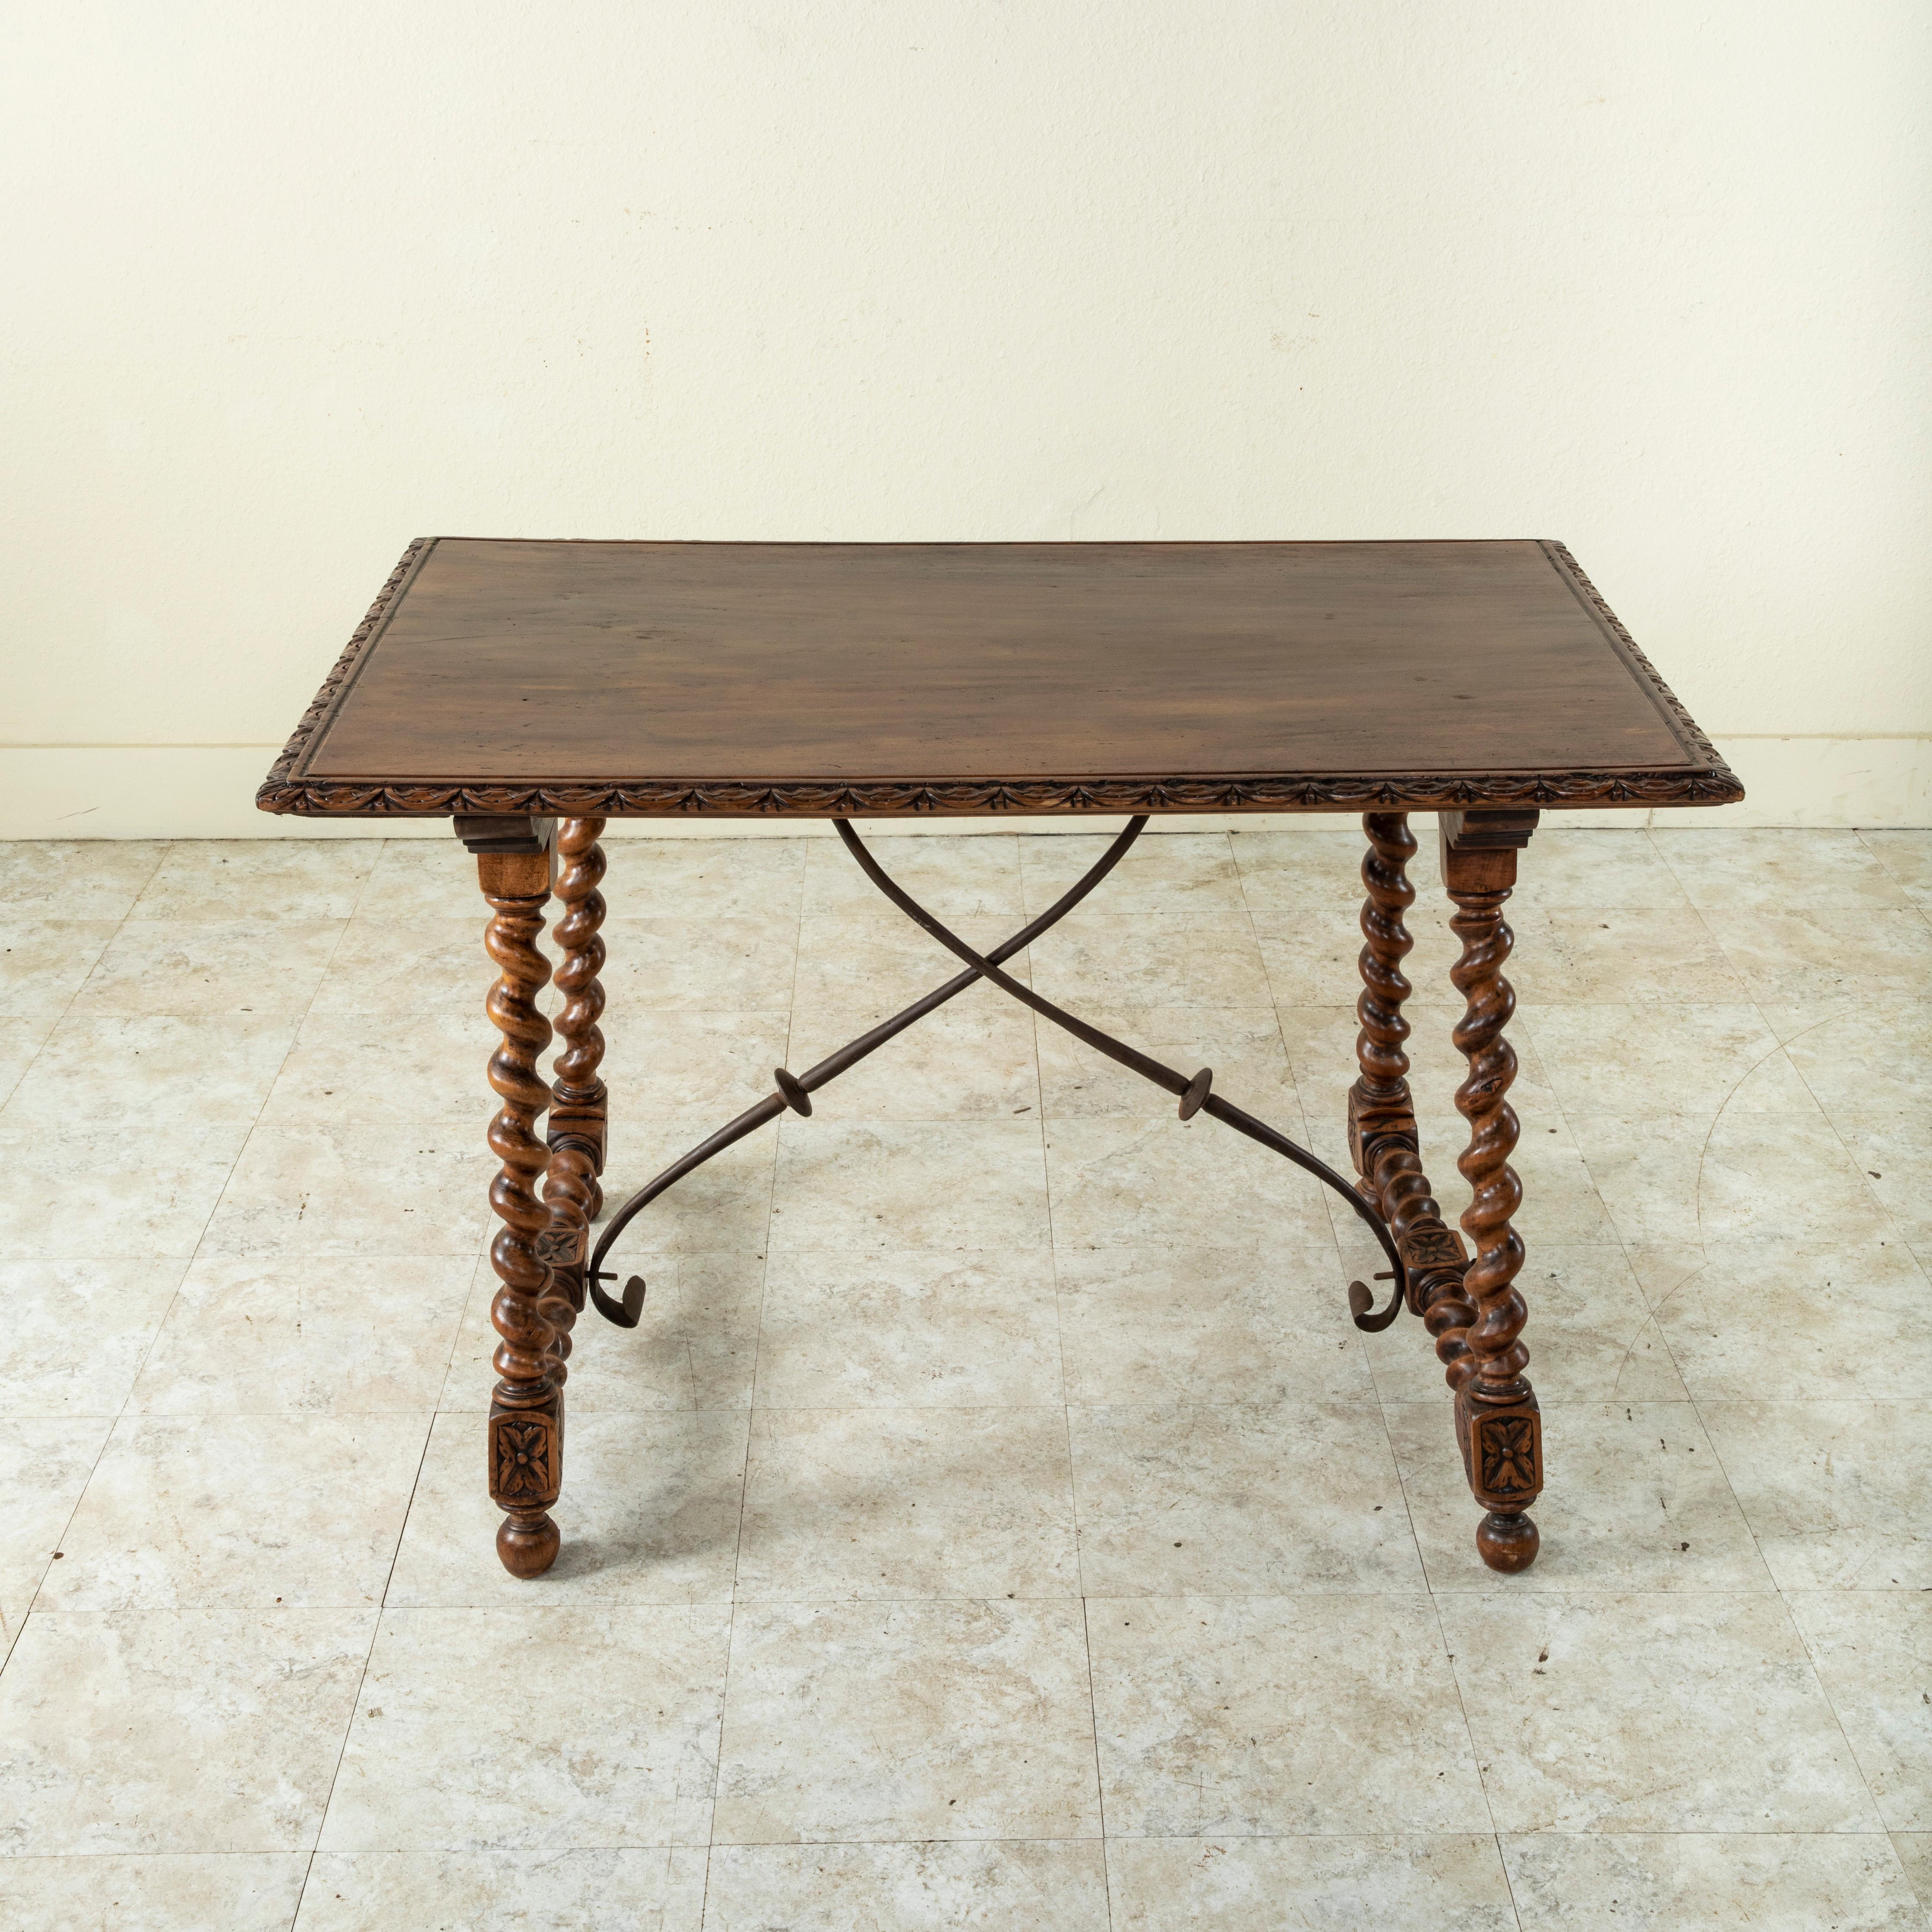 This late nineteenth century walnut table from France features a hand-carved beveled top made from a single piece of wood, and rests on classic barley twist legs. Barley twist stretchers are joined to the legs at the hand pegged lower die joints,